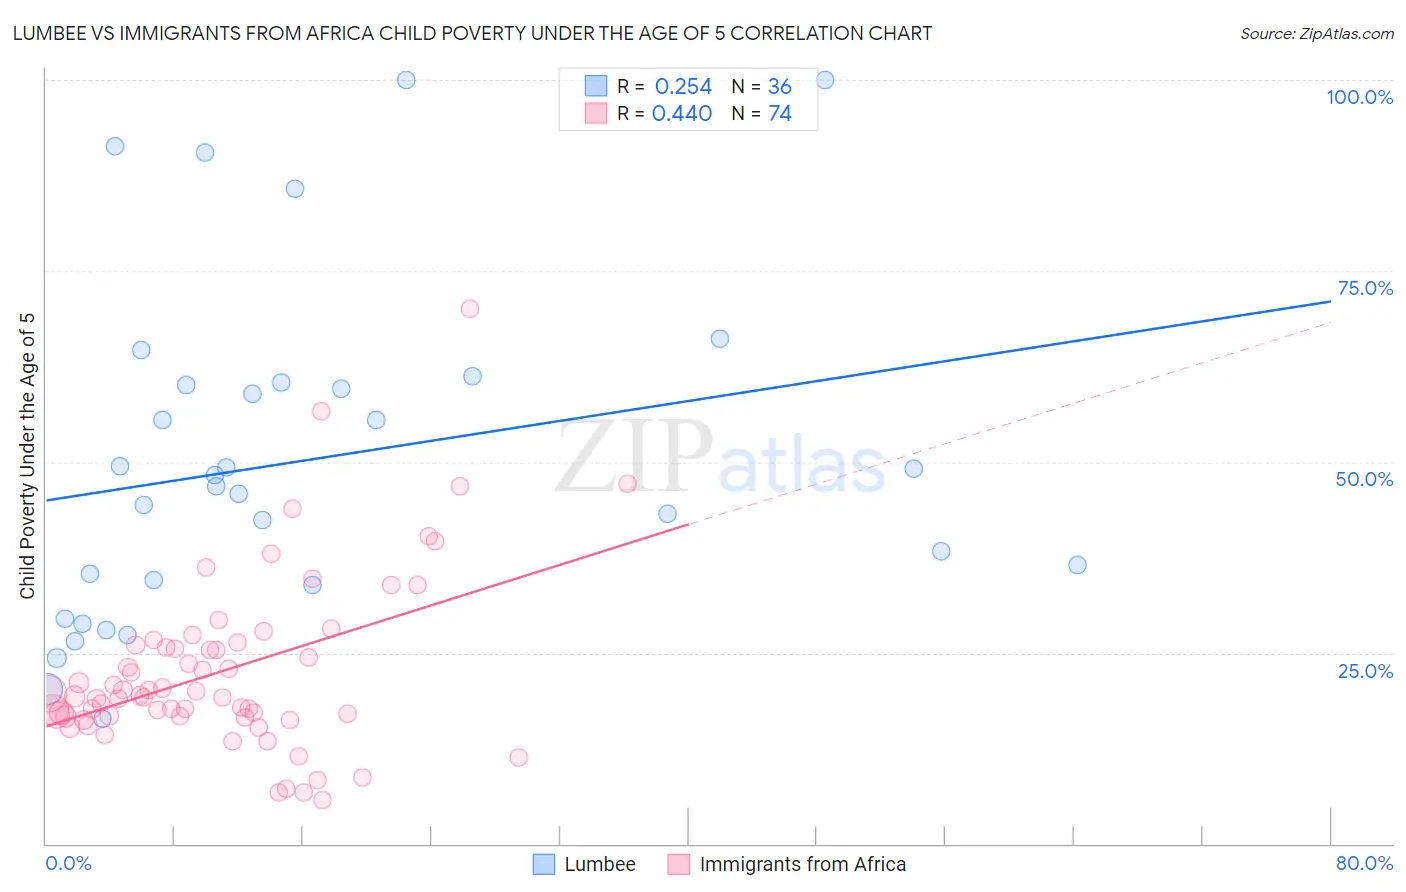 Lumbee vs Immigrants from Africa Child Poverty Under the Age of 5